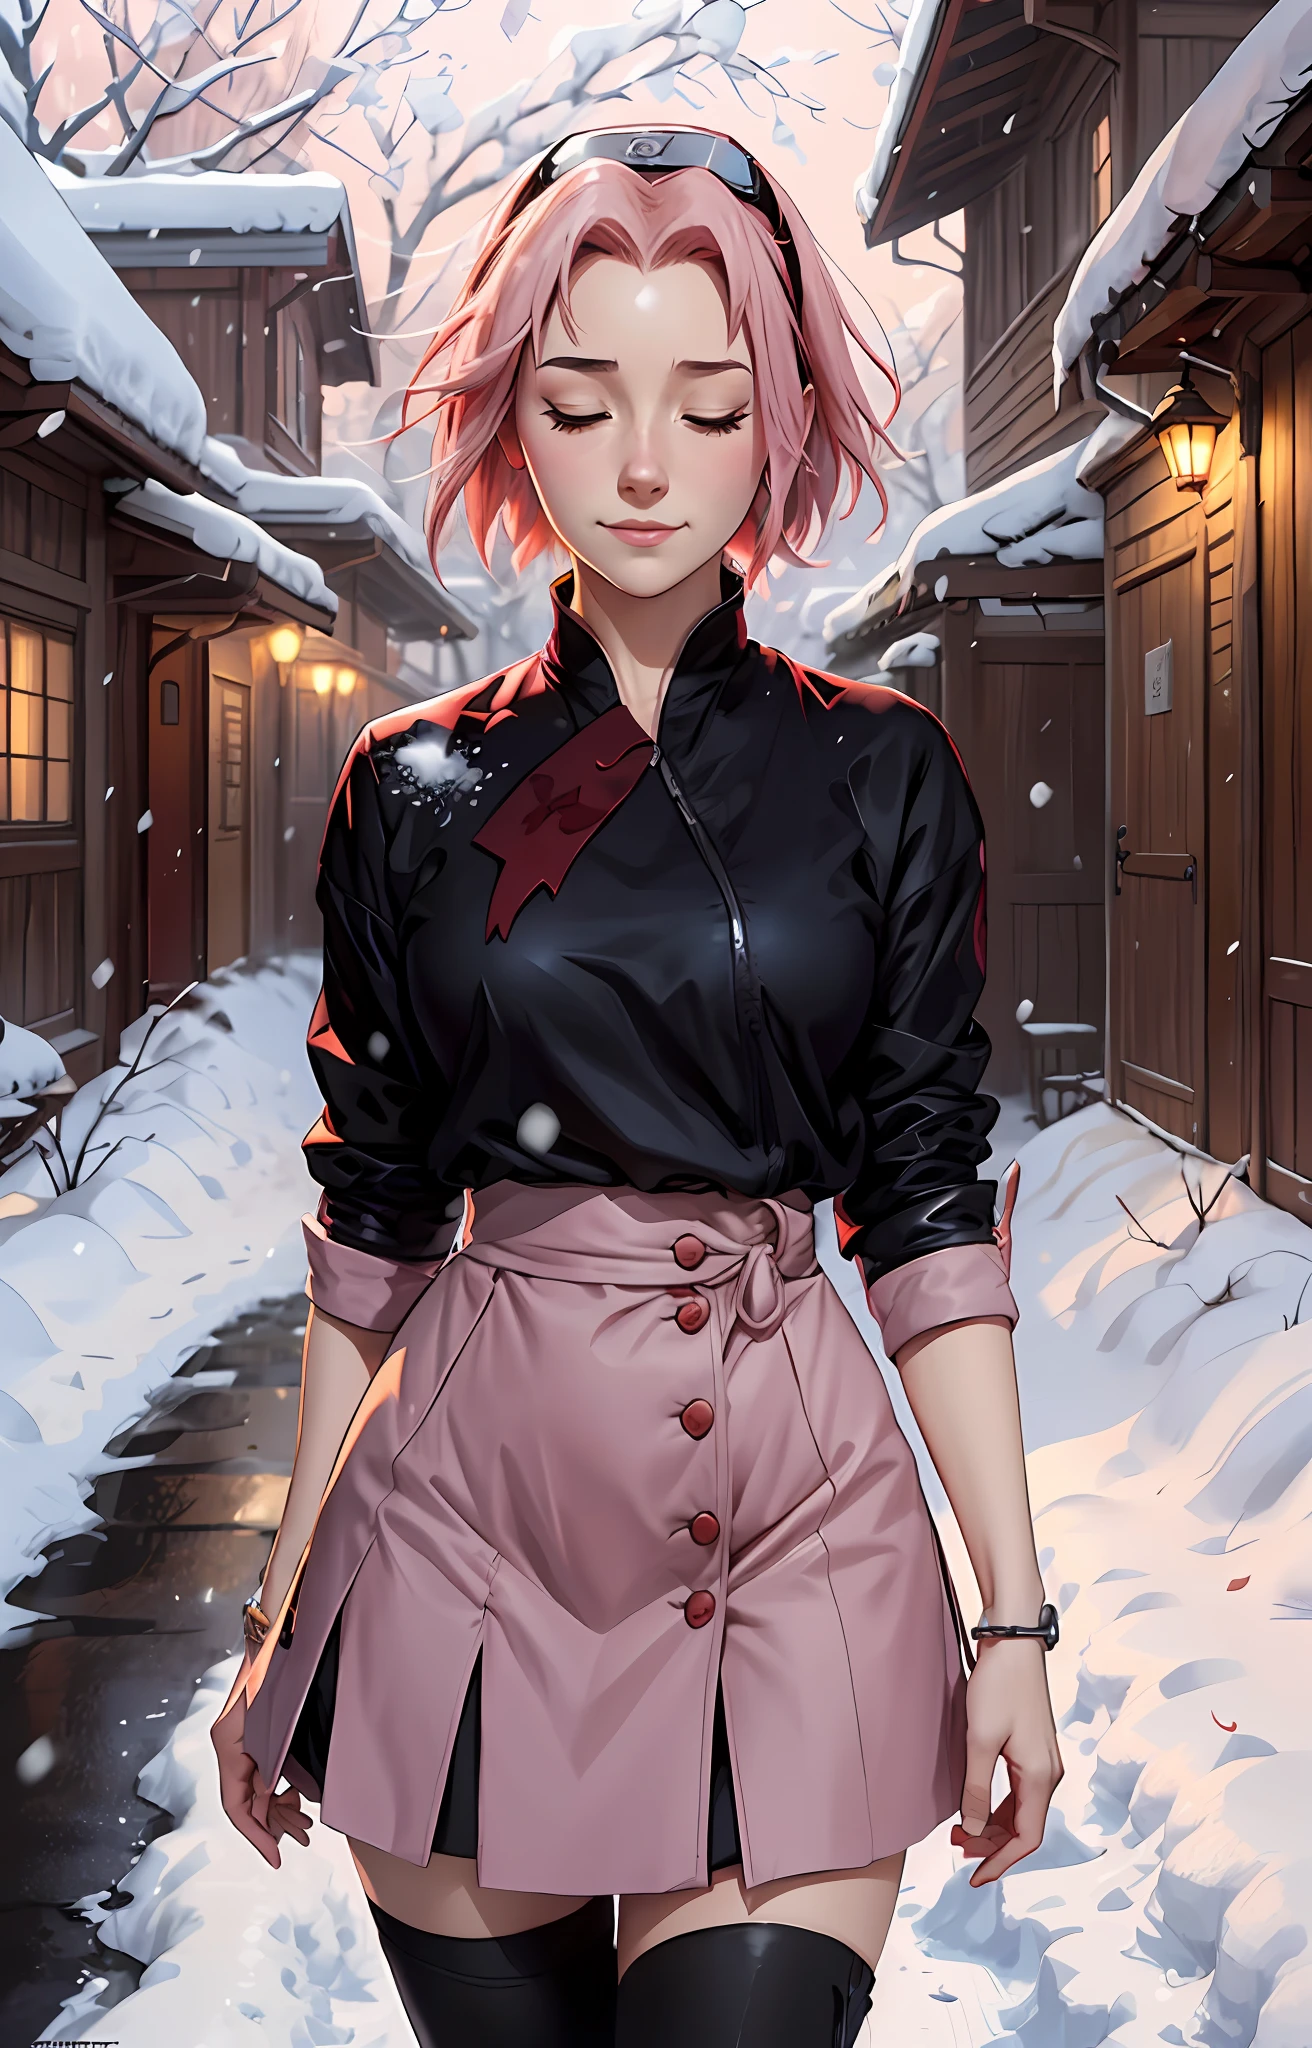 Sakura haruno, ((solo)), alone, ((forehead the show)), elegant,wearing a red blouse and a light pink skirt, Sakura haruno in Naruto Shippuden, smiling, eyes half closed, she is charming, pink hair, delicate, young, short hair, detailed, high definition, ((full body)), full body, ((serious)), in a village, surrounded by snow, snowing, she is a beautiful woman, beautiful and pleasant woman,  beautiful, beautiful, high quality, defined eyes, high definition, sharp, sharp strokes, beautiful, red bow in hair,trending on artstation, by rhads, andreas rocha, rossdraws, makoto shinkai, laurie greasley, lois van baarle, ilya kuvshinov and greg rutkowski